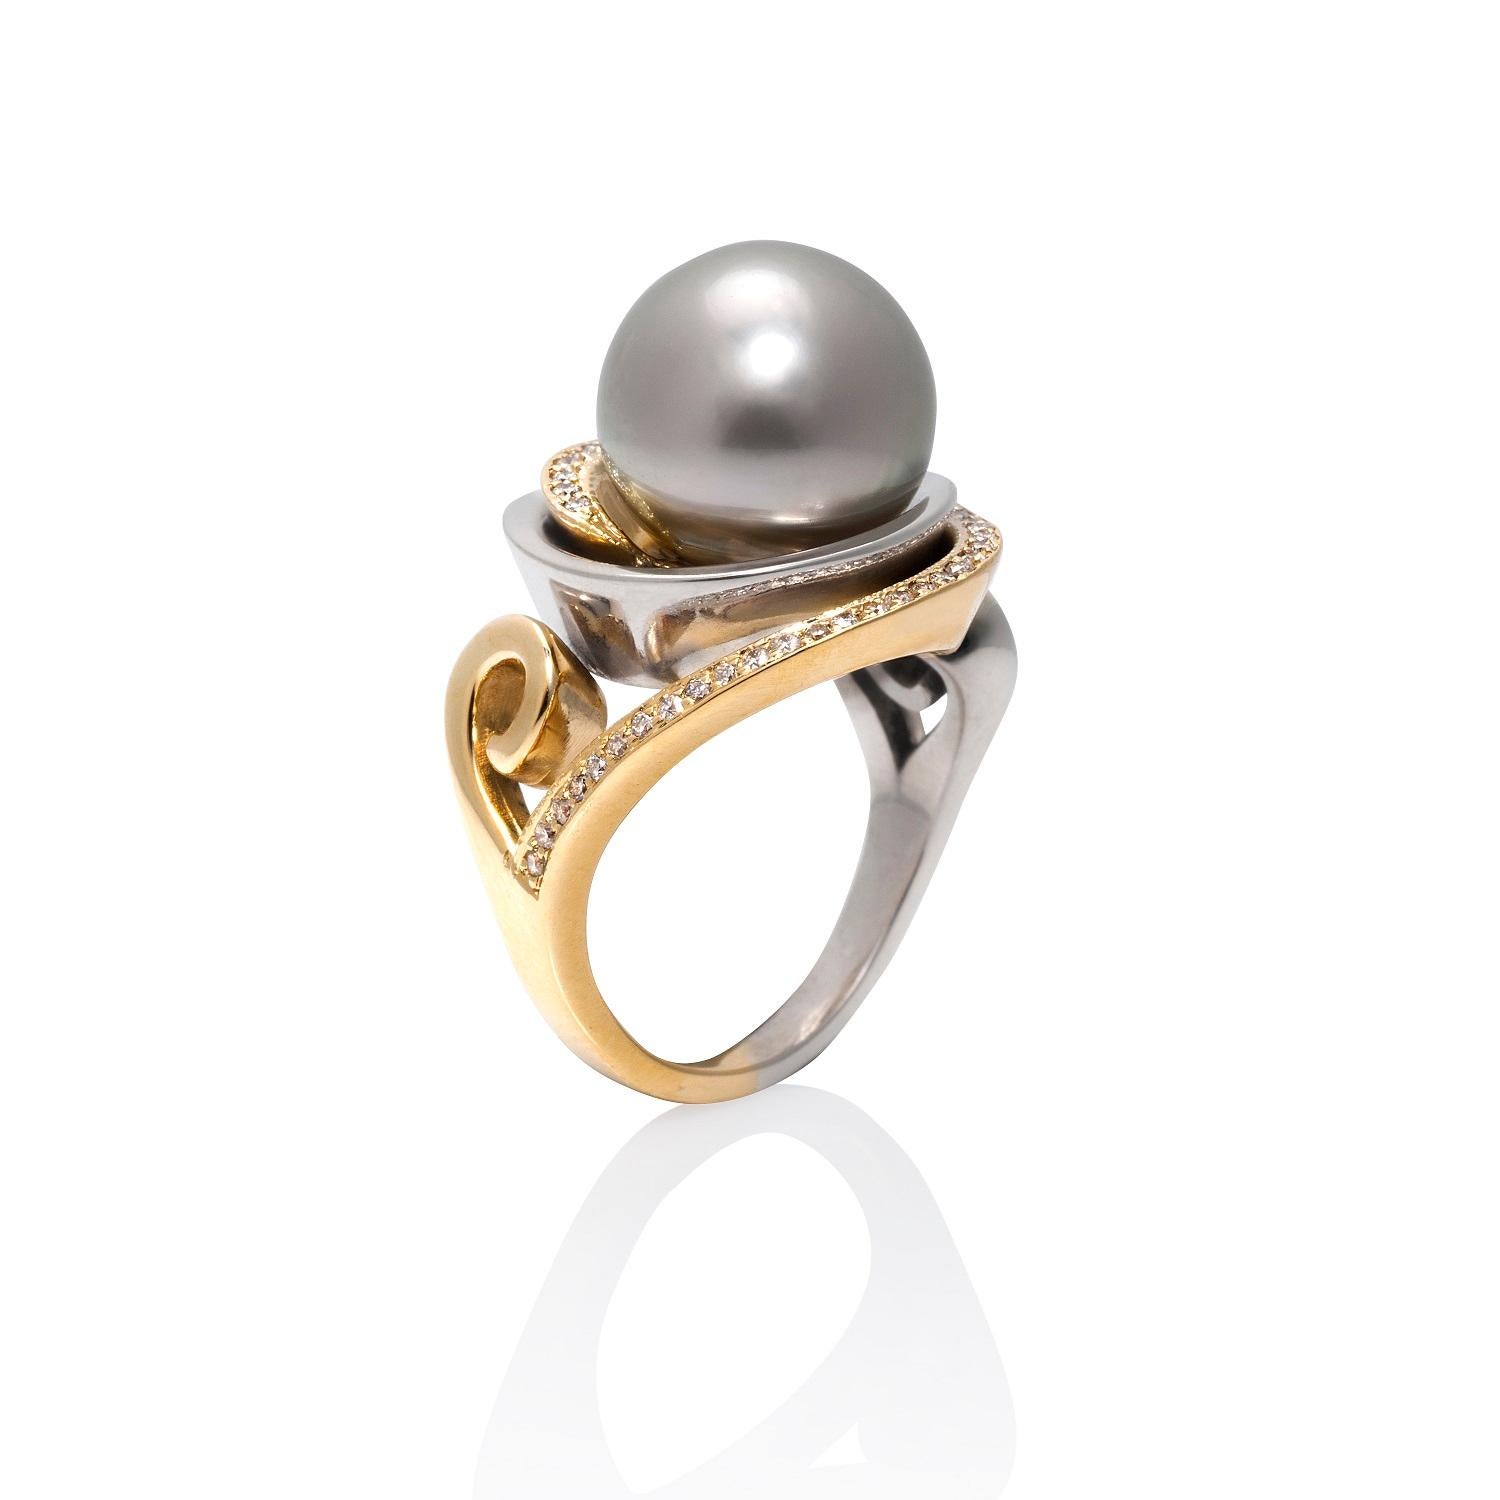 The Nebula Cocktail Ring with the 12mm natural Black Tahitian pearl is a ring with interlocking spirals of 14ky and argentium sterling silver that wrap around the pearl. The 14k spiral is pave set with sixty-eight 0.8mm VS2-SI1 diamonds.

This ring